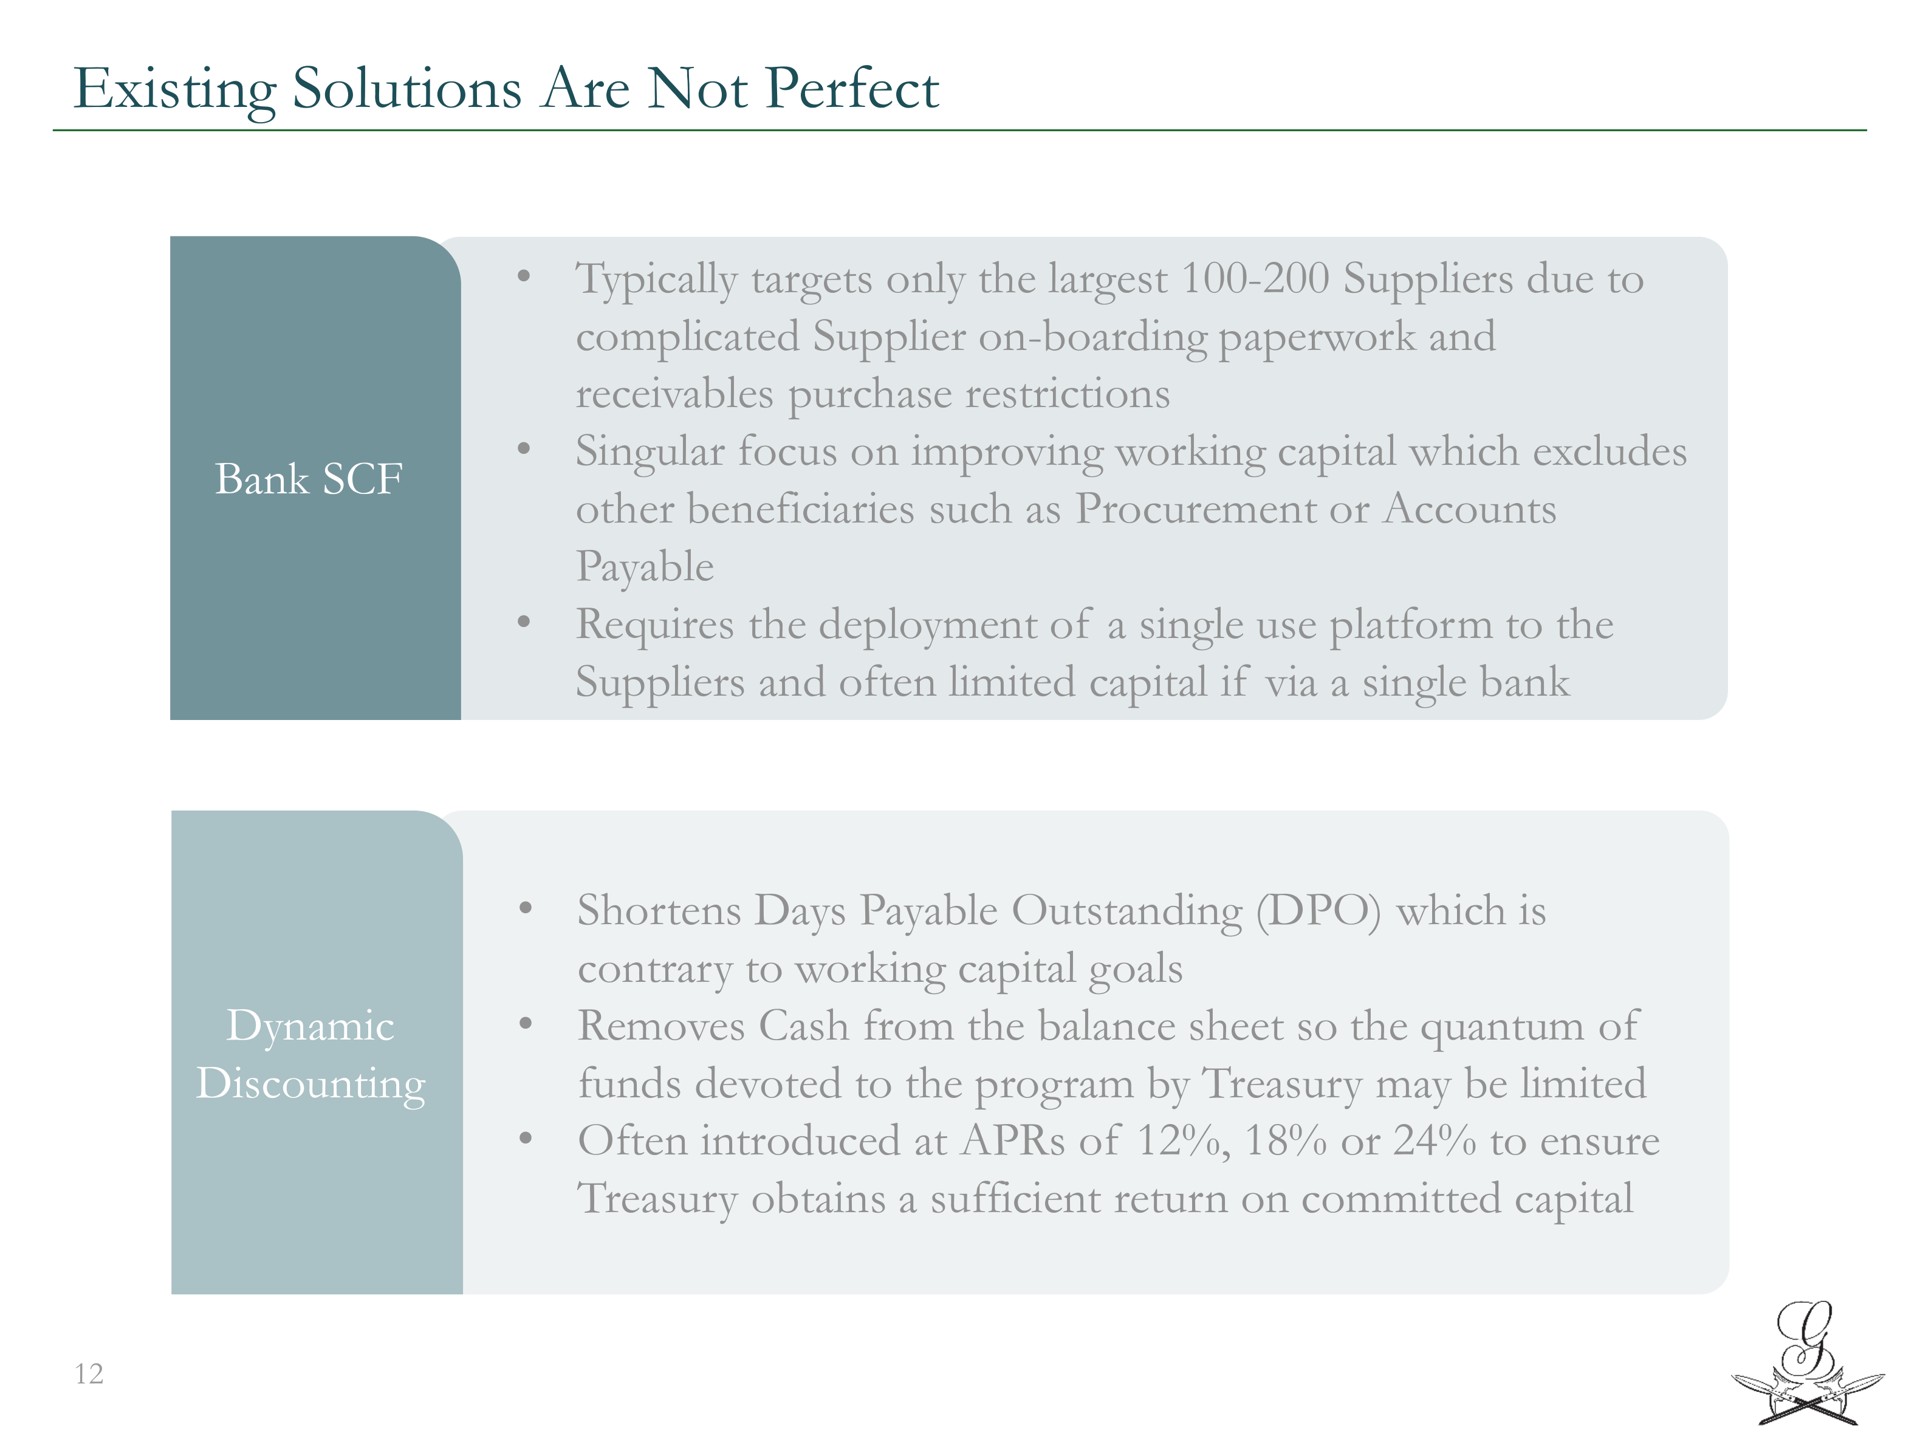 existing solutions are not perfect bank typically targets only the suppliers due to complicated supplier on boarding and receivables purchase restrictions singular focus on improving working capital which excludes other beneficiaries such as procurement or accounts payable requires the deployment of a single use platform to the suppliers and often limited capital if via a single bank dynamic discounting shortens days payable outstanding which is contrary to working capital goals removes cash from the balance sheet so the quantum of funds devoted to the program by treasury may be limited often introduced at of or to ensure treasury obtains a sufficient return on committed capital | Greensill Capital